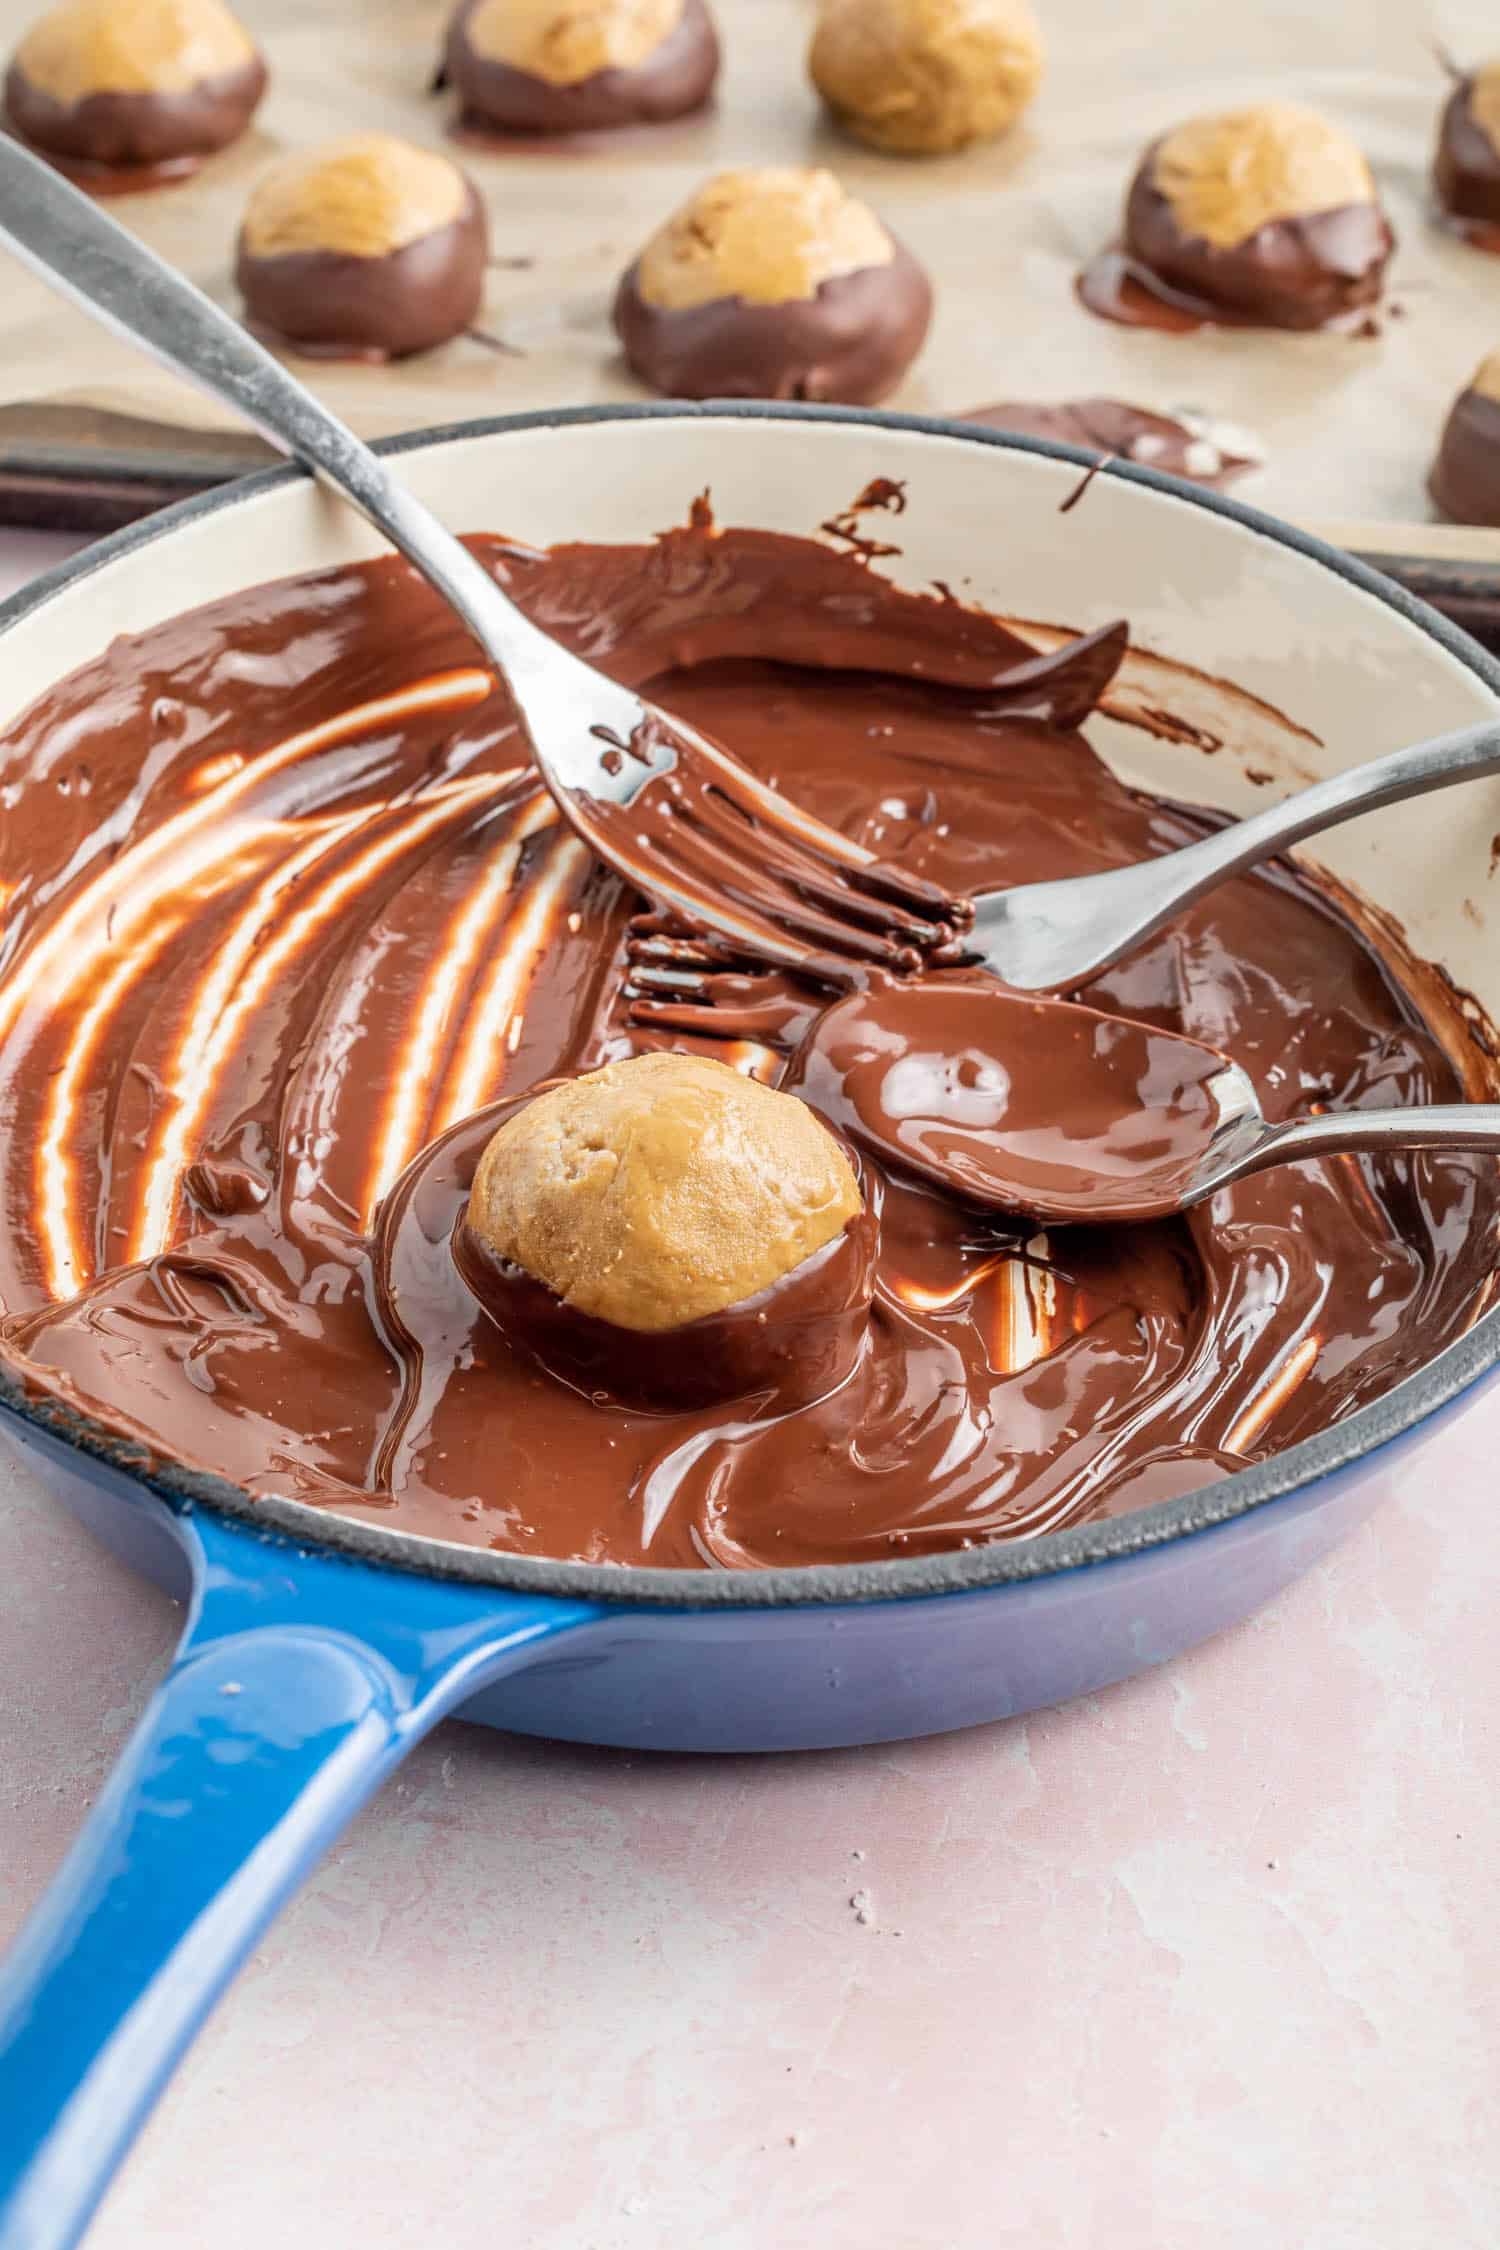 melted chocolate in a enameled cast iron skillet, dipping a buckeye ball into the chocolate